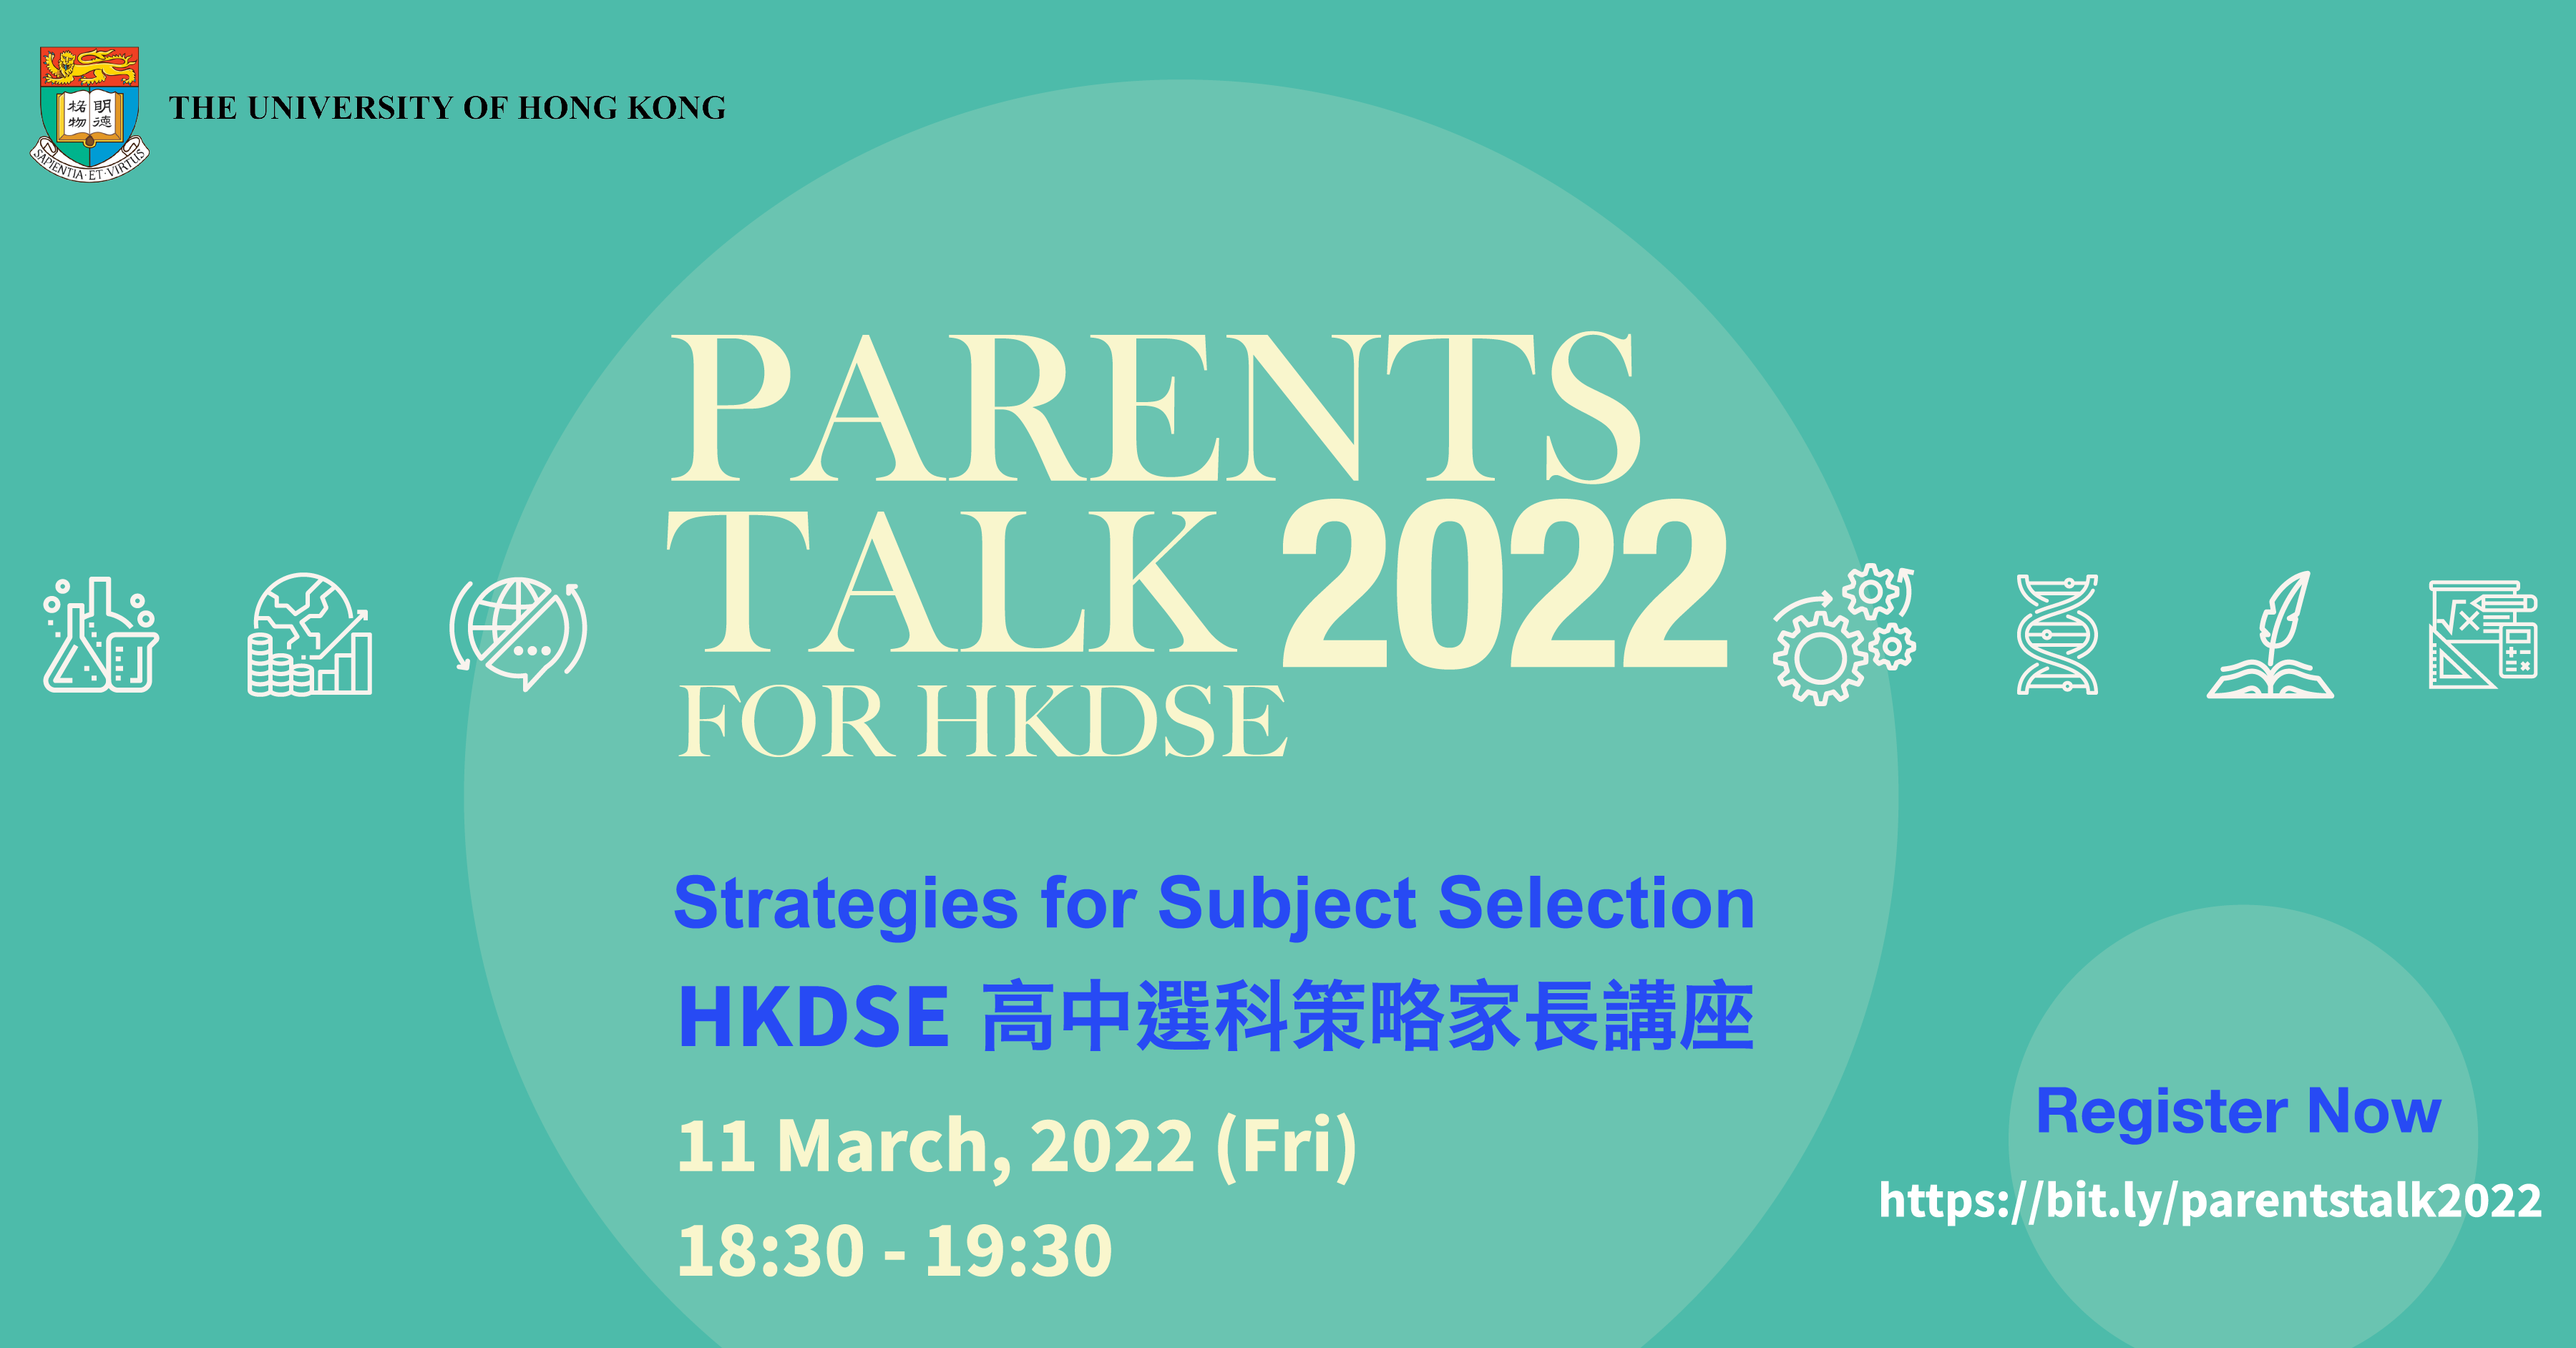 Animated text "Parents Talk for HKDSE 2022 - Strategies for Subject Selection"